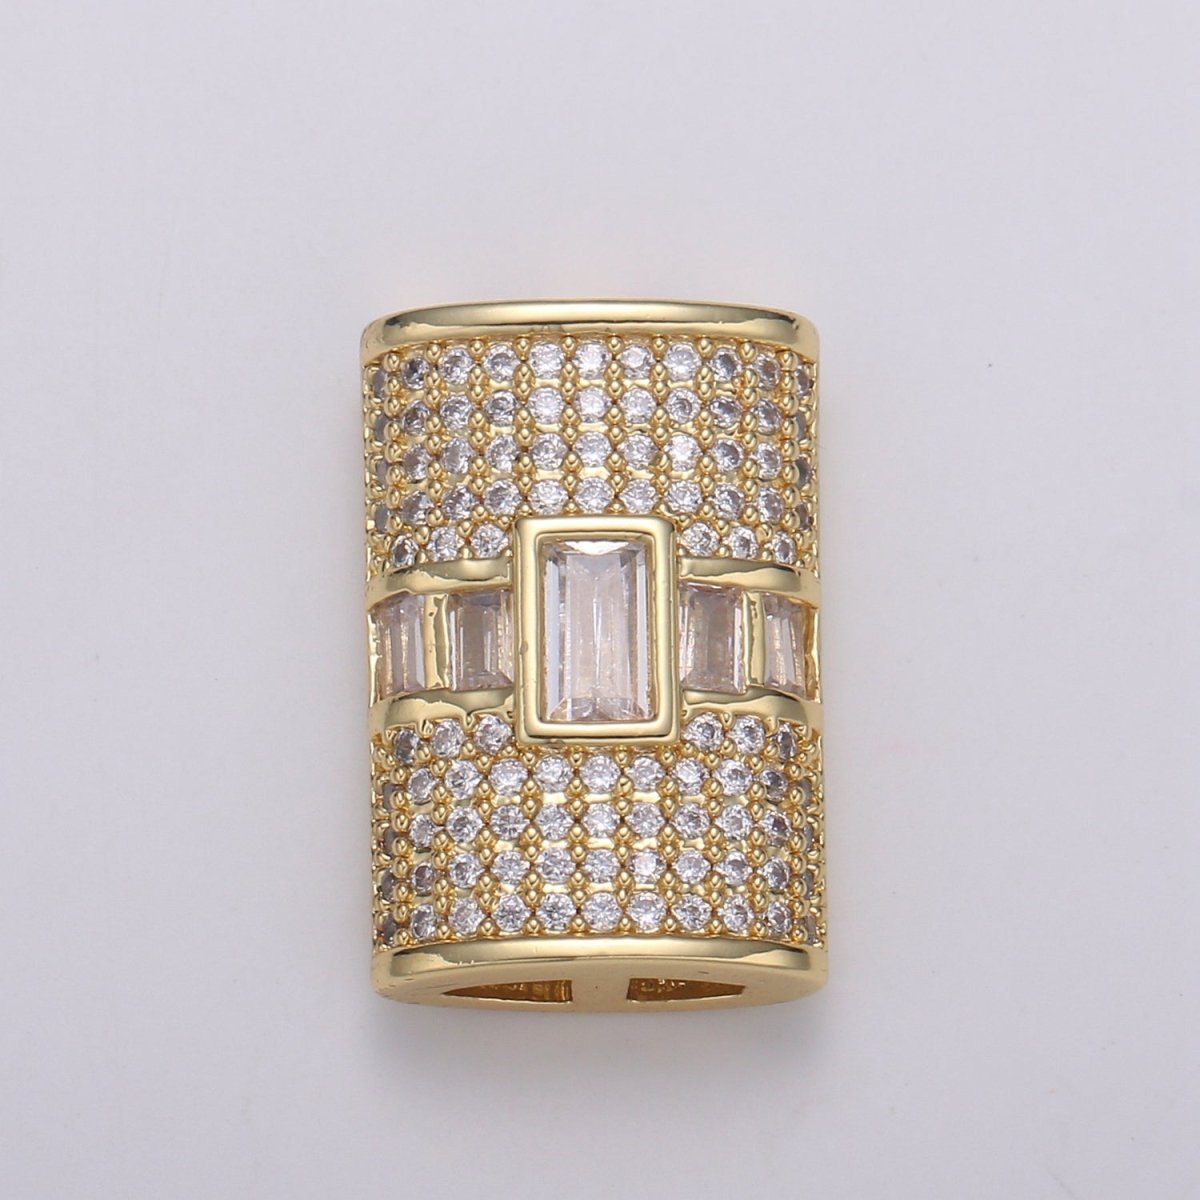 1pc 24K Gold Baguette Pave CZ Beads Spacer Beads, for DIY Jewelry Making European Charms Beaded Bracelet, Cluster CZ Beads B420 - DLUXCA